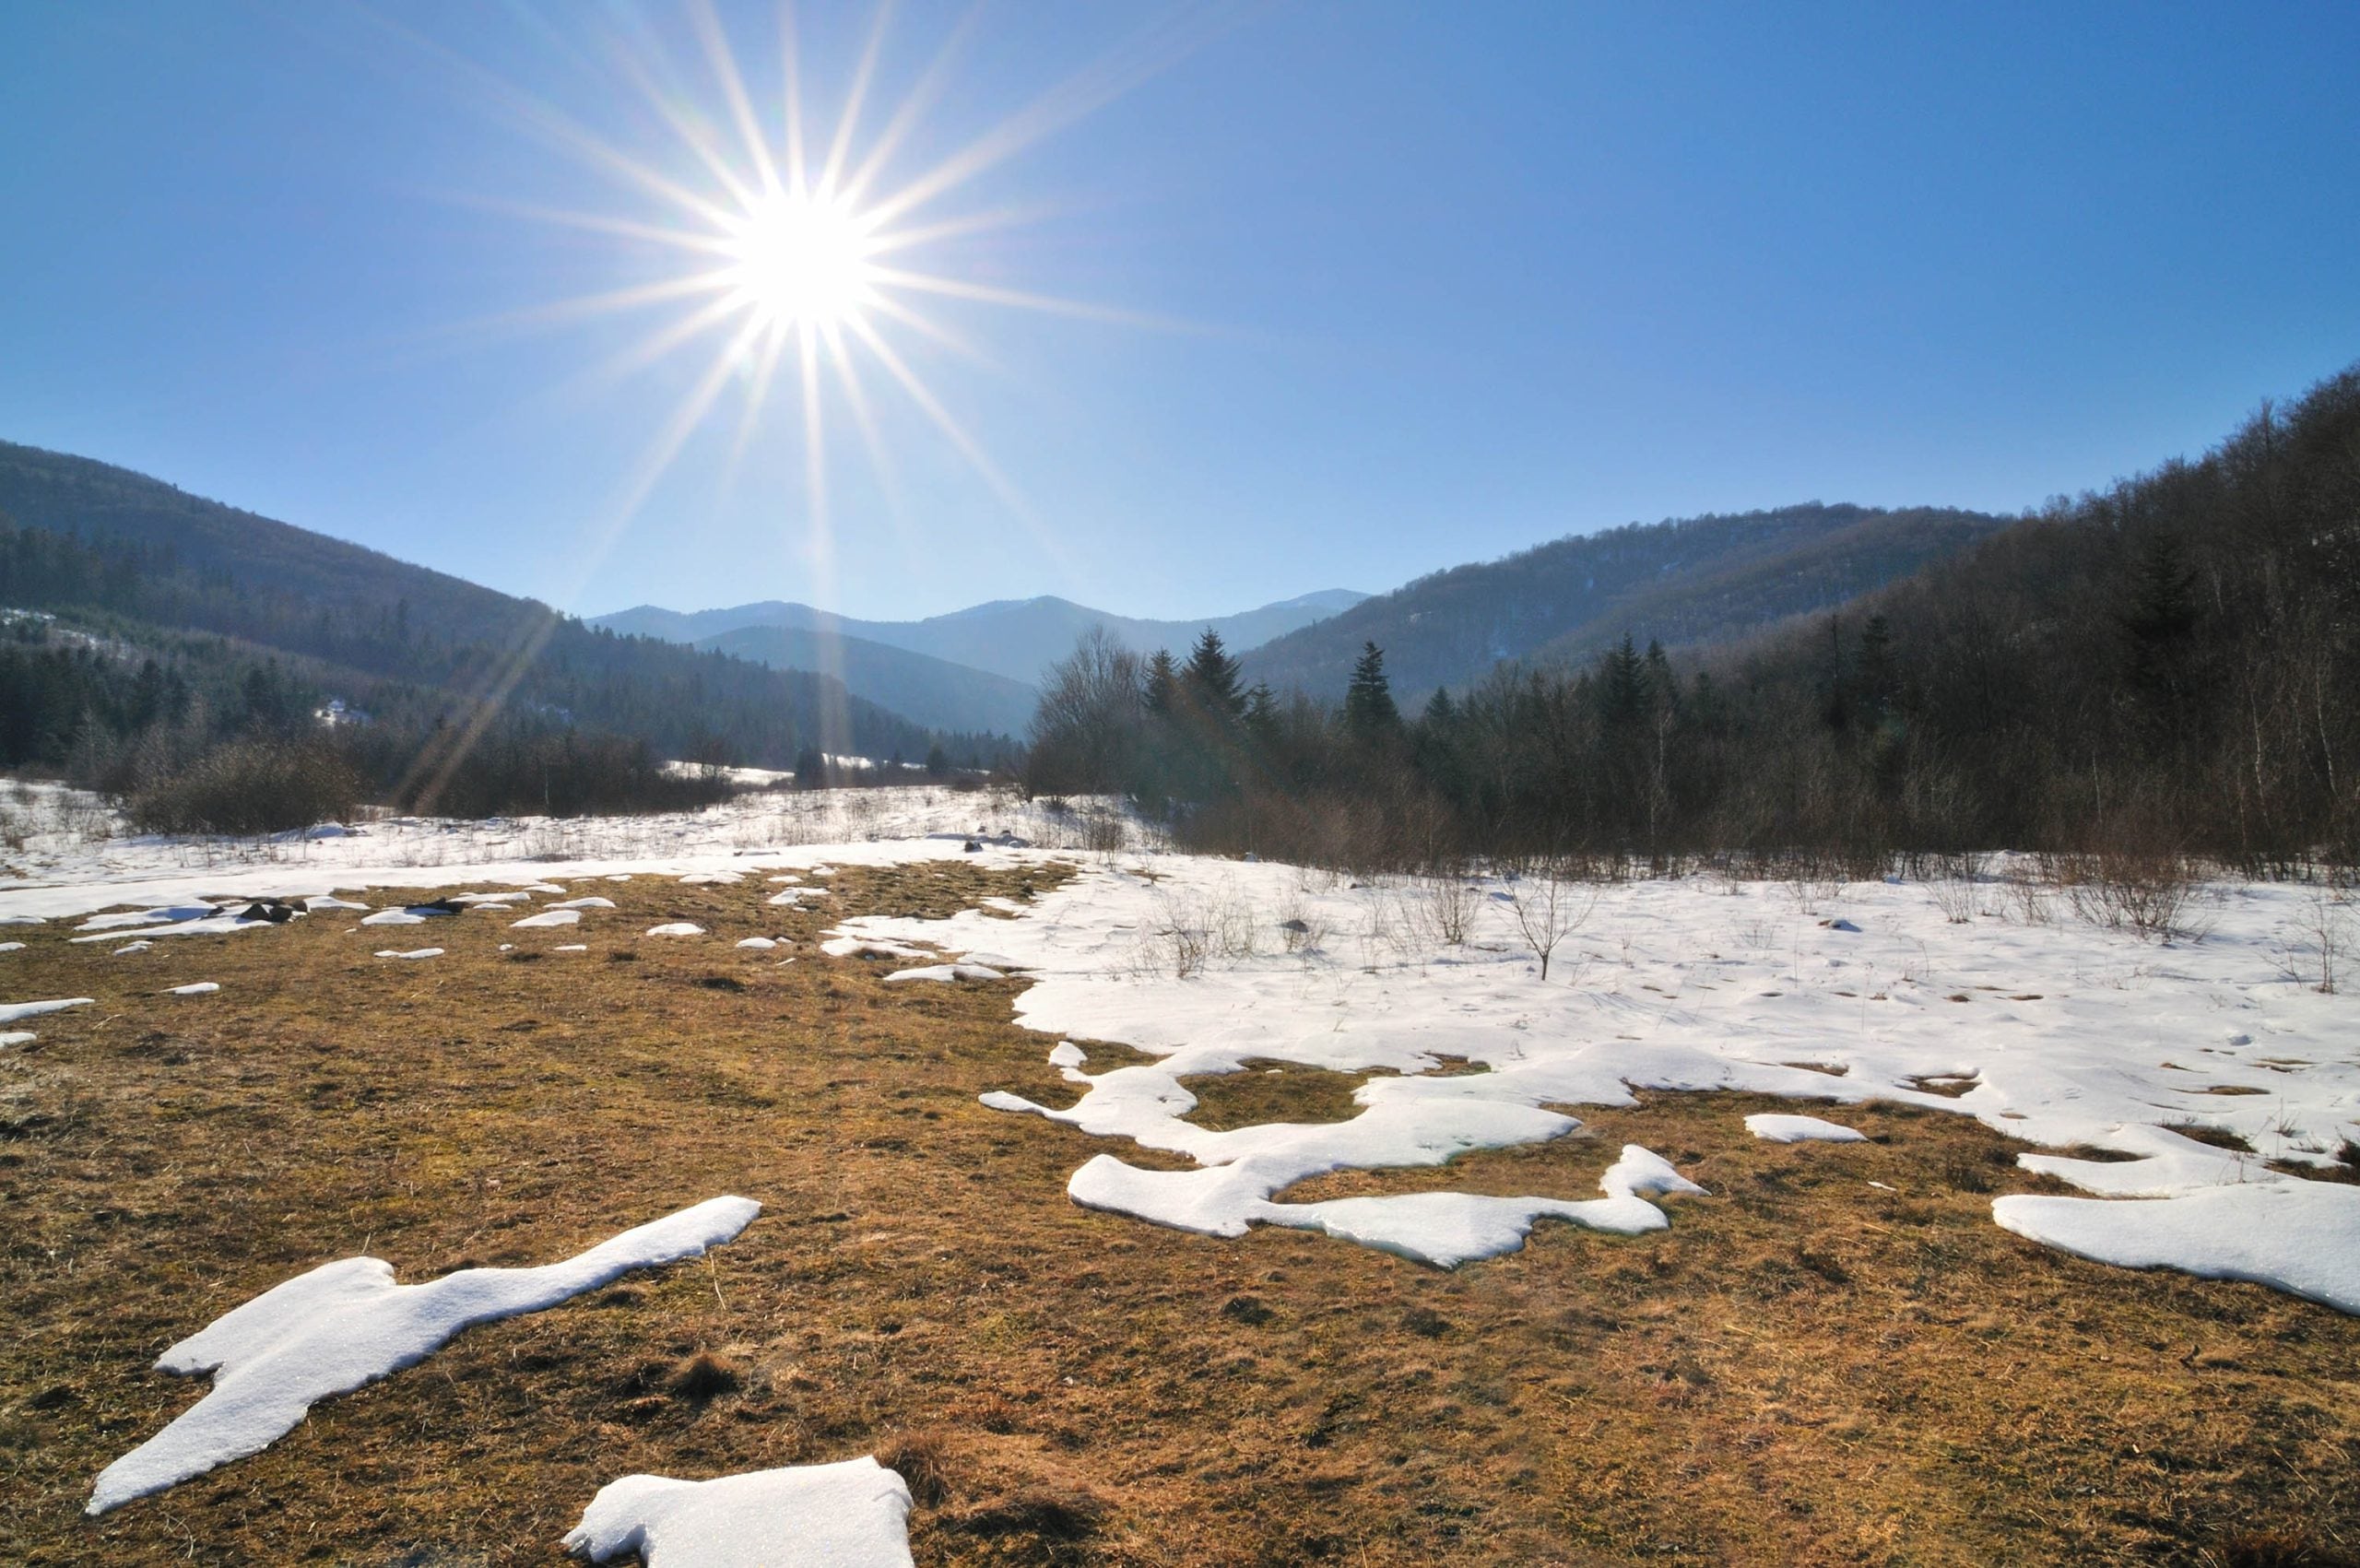 April snowpack lower than March, but still above normal — RDKB